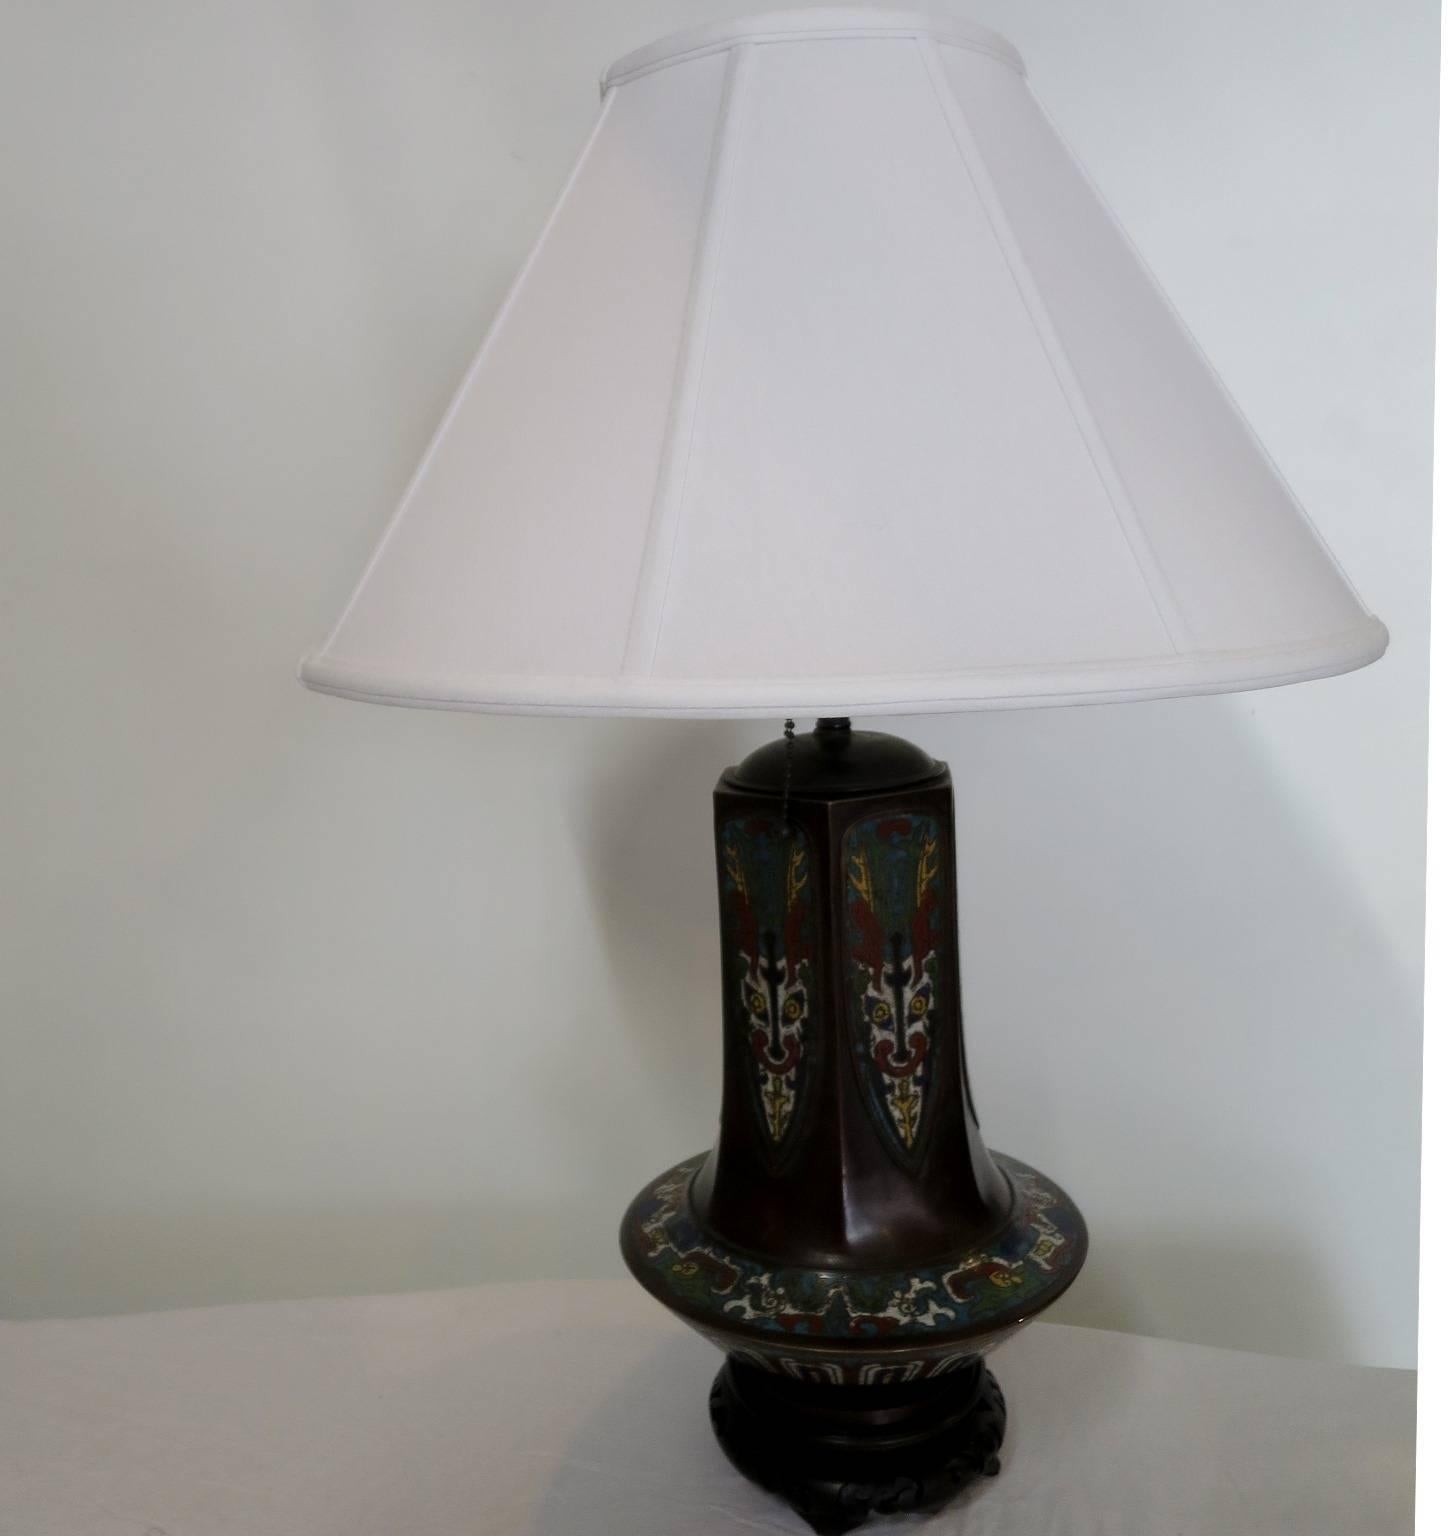 The cloisonné enamel bronze vase is mounted in table lamp.
The quality of the piece is very interesting as an object by itself.
The shape is unusual. The dimension of the vase is 13